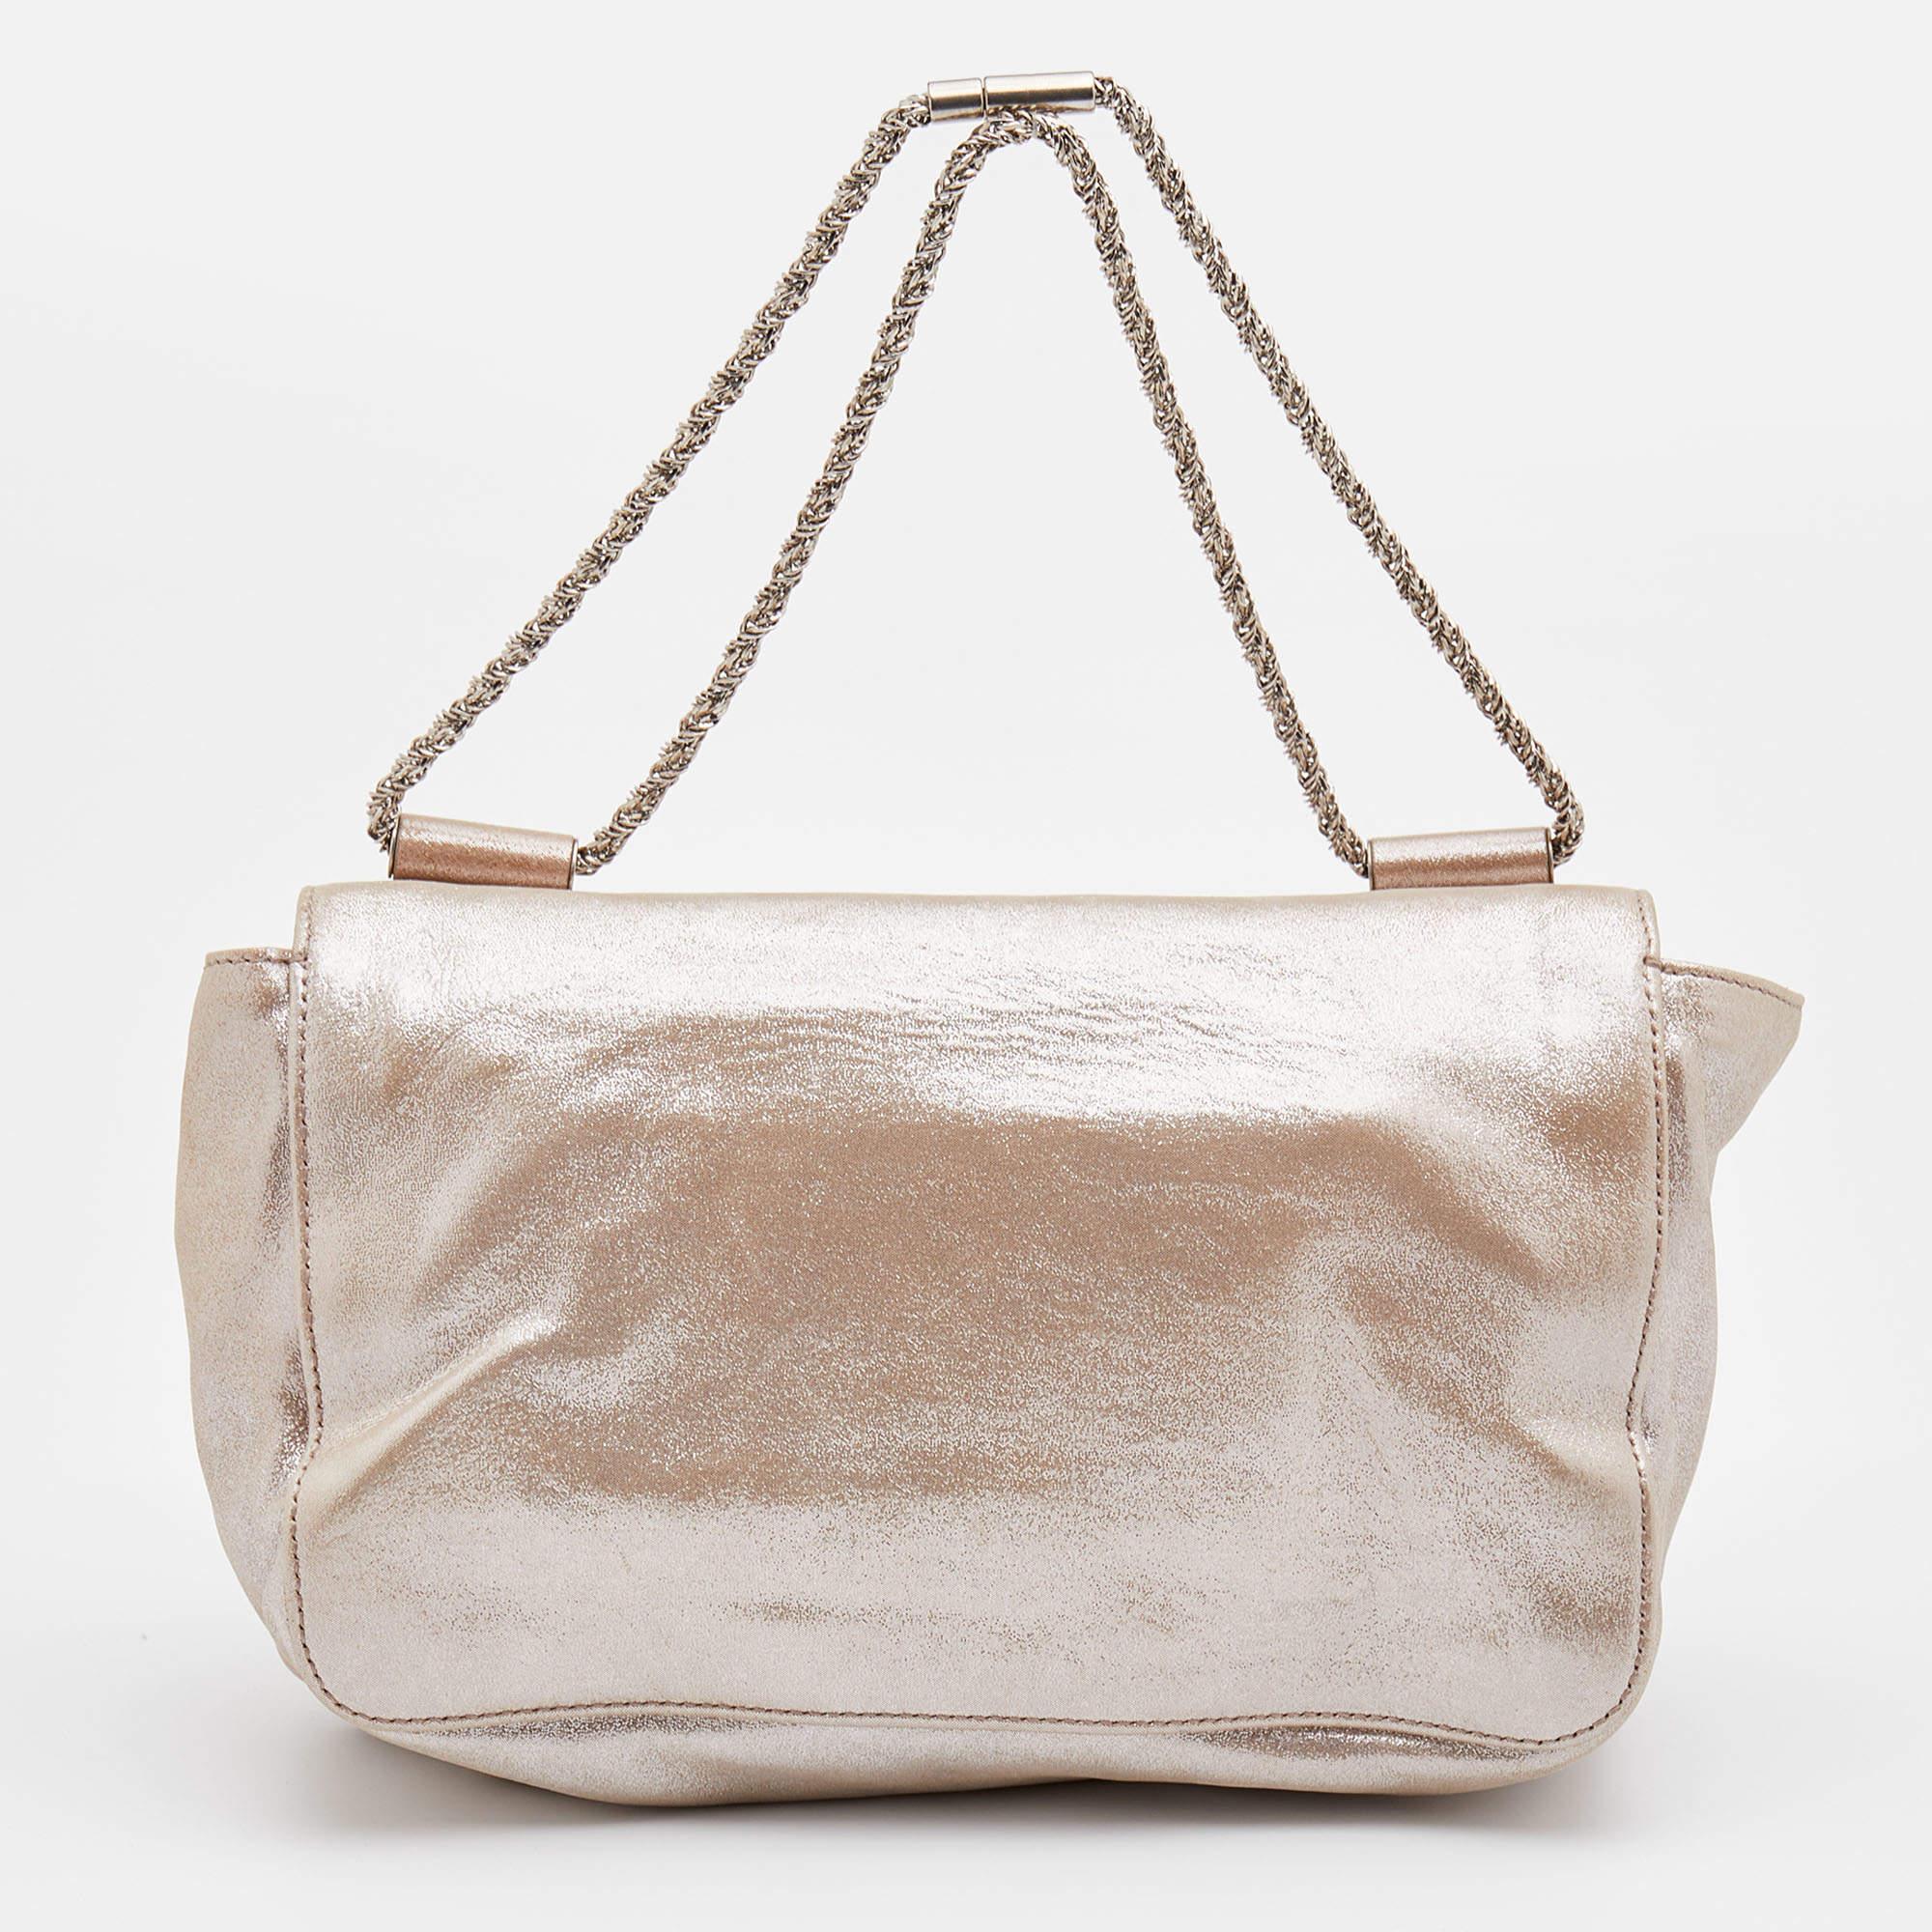 If you are looking for something that reflects chic and luxury, then this bag is a perfect choice. Crafted from premium materials, it can be conveniently carried around, and its interior is spaciously sized to house your belongings with